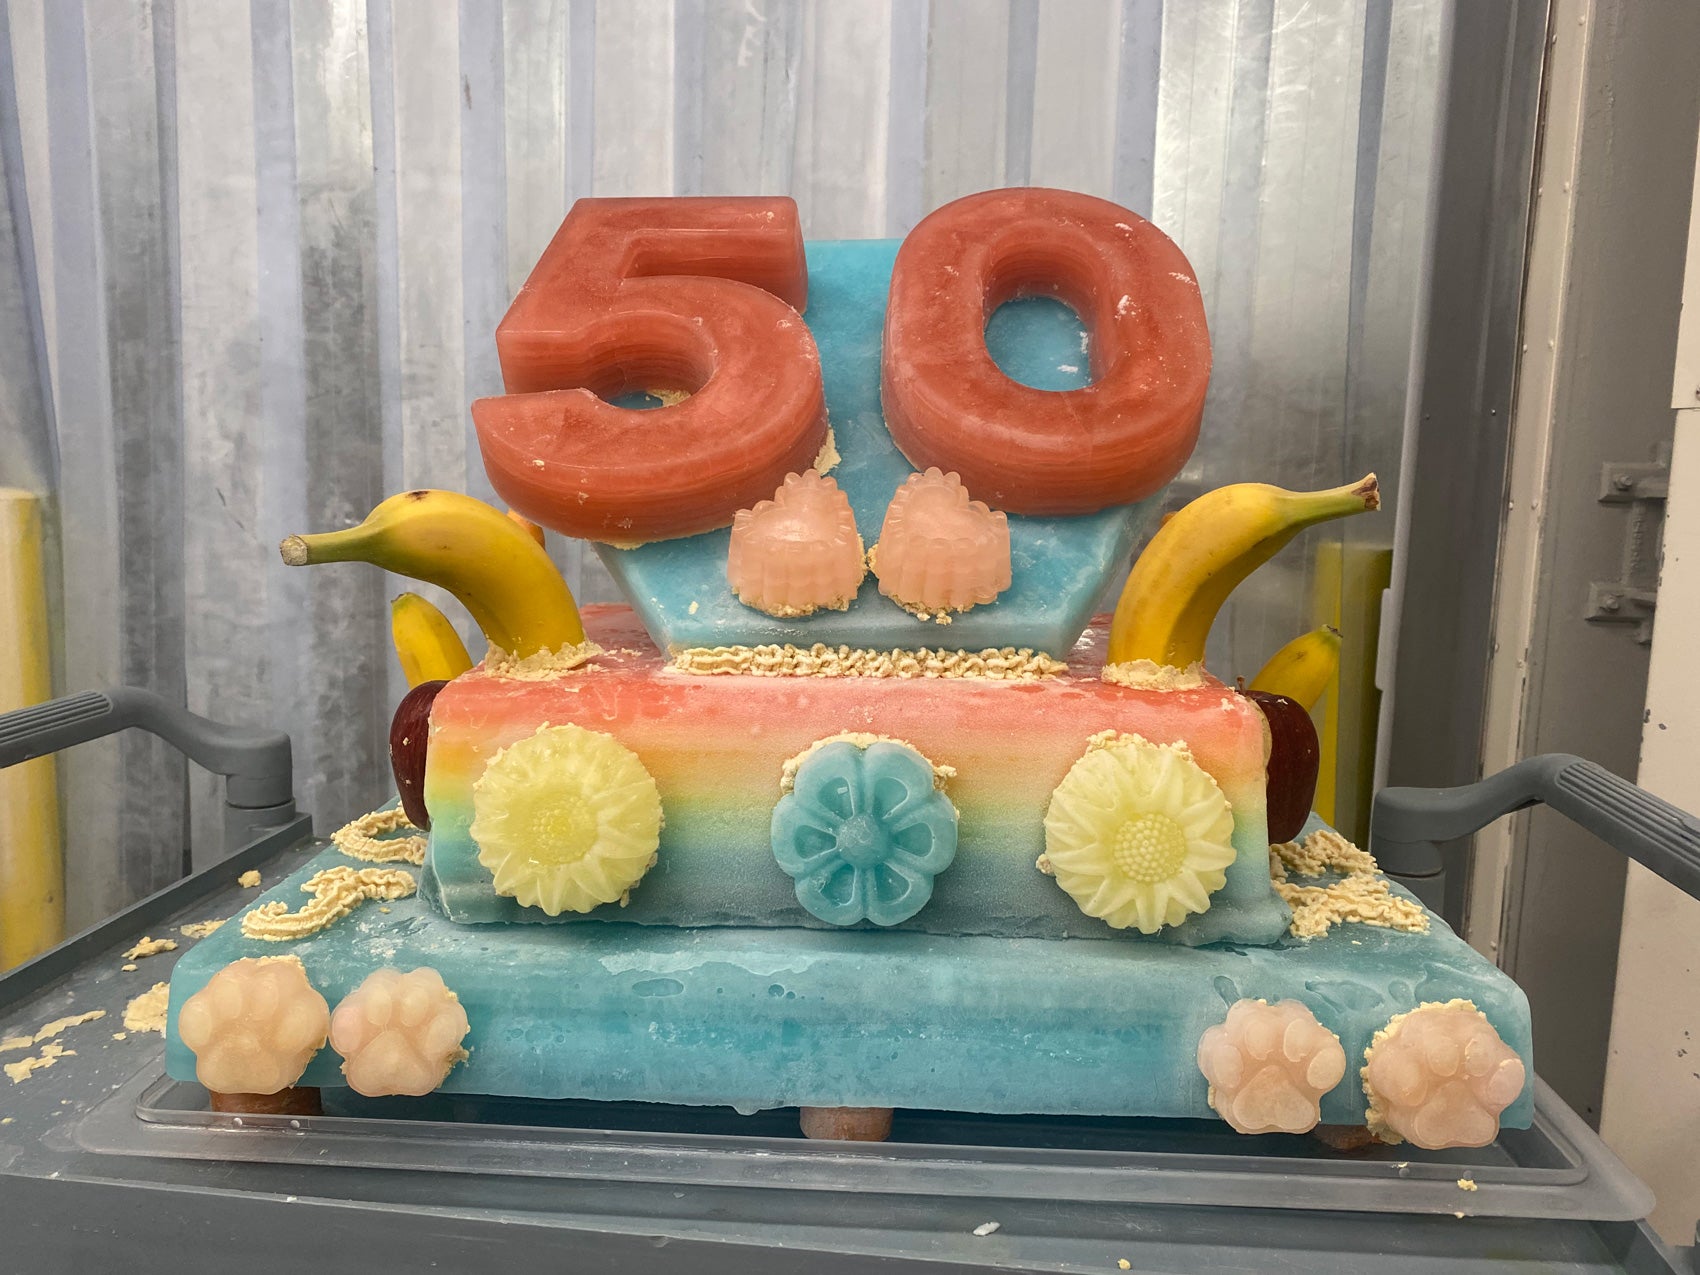 Cake for a 50th birthday – License Images – 13397551 ❘ StockFood